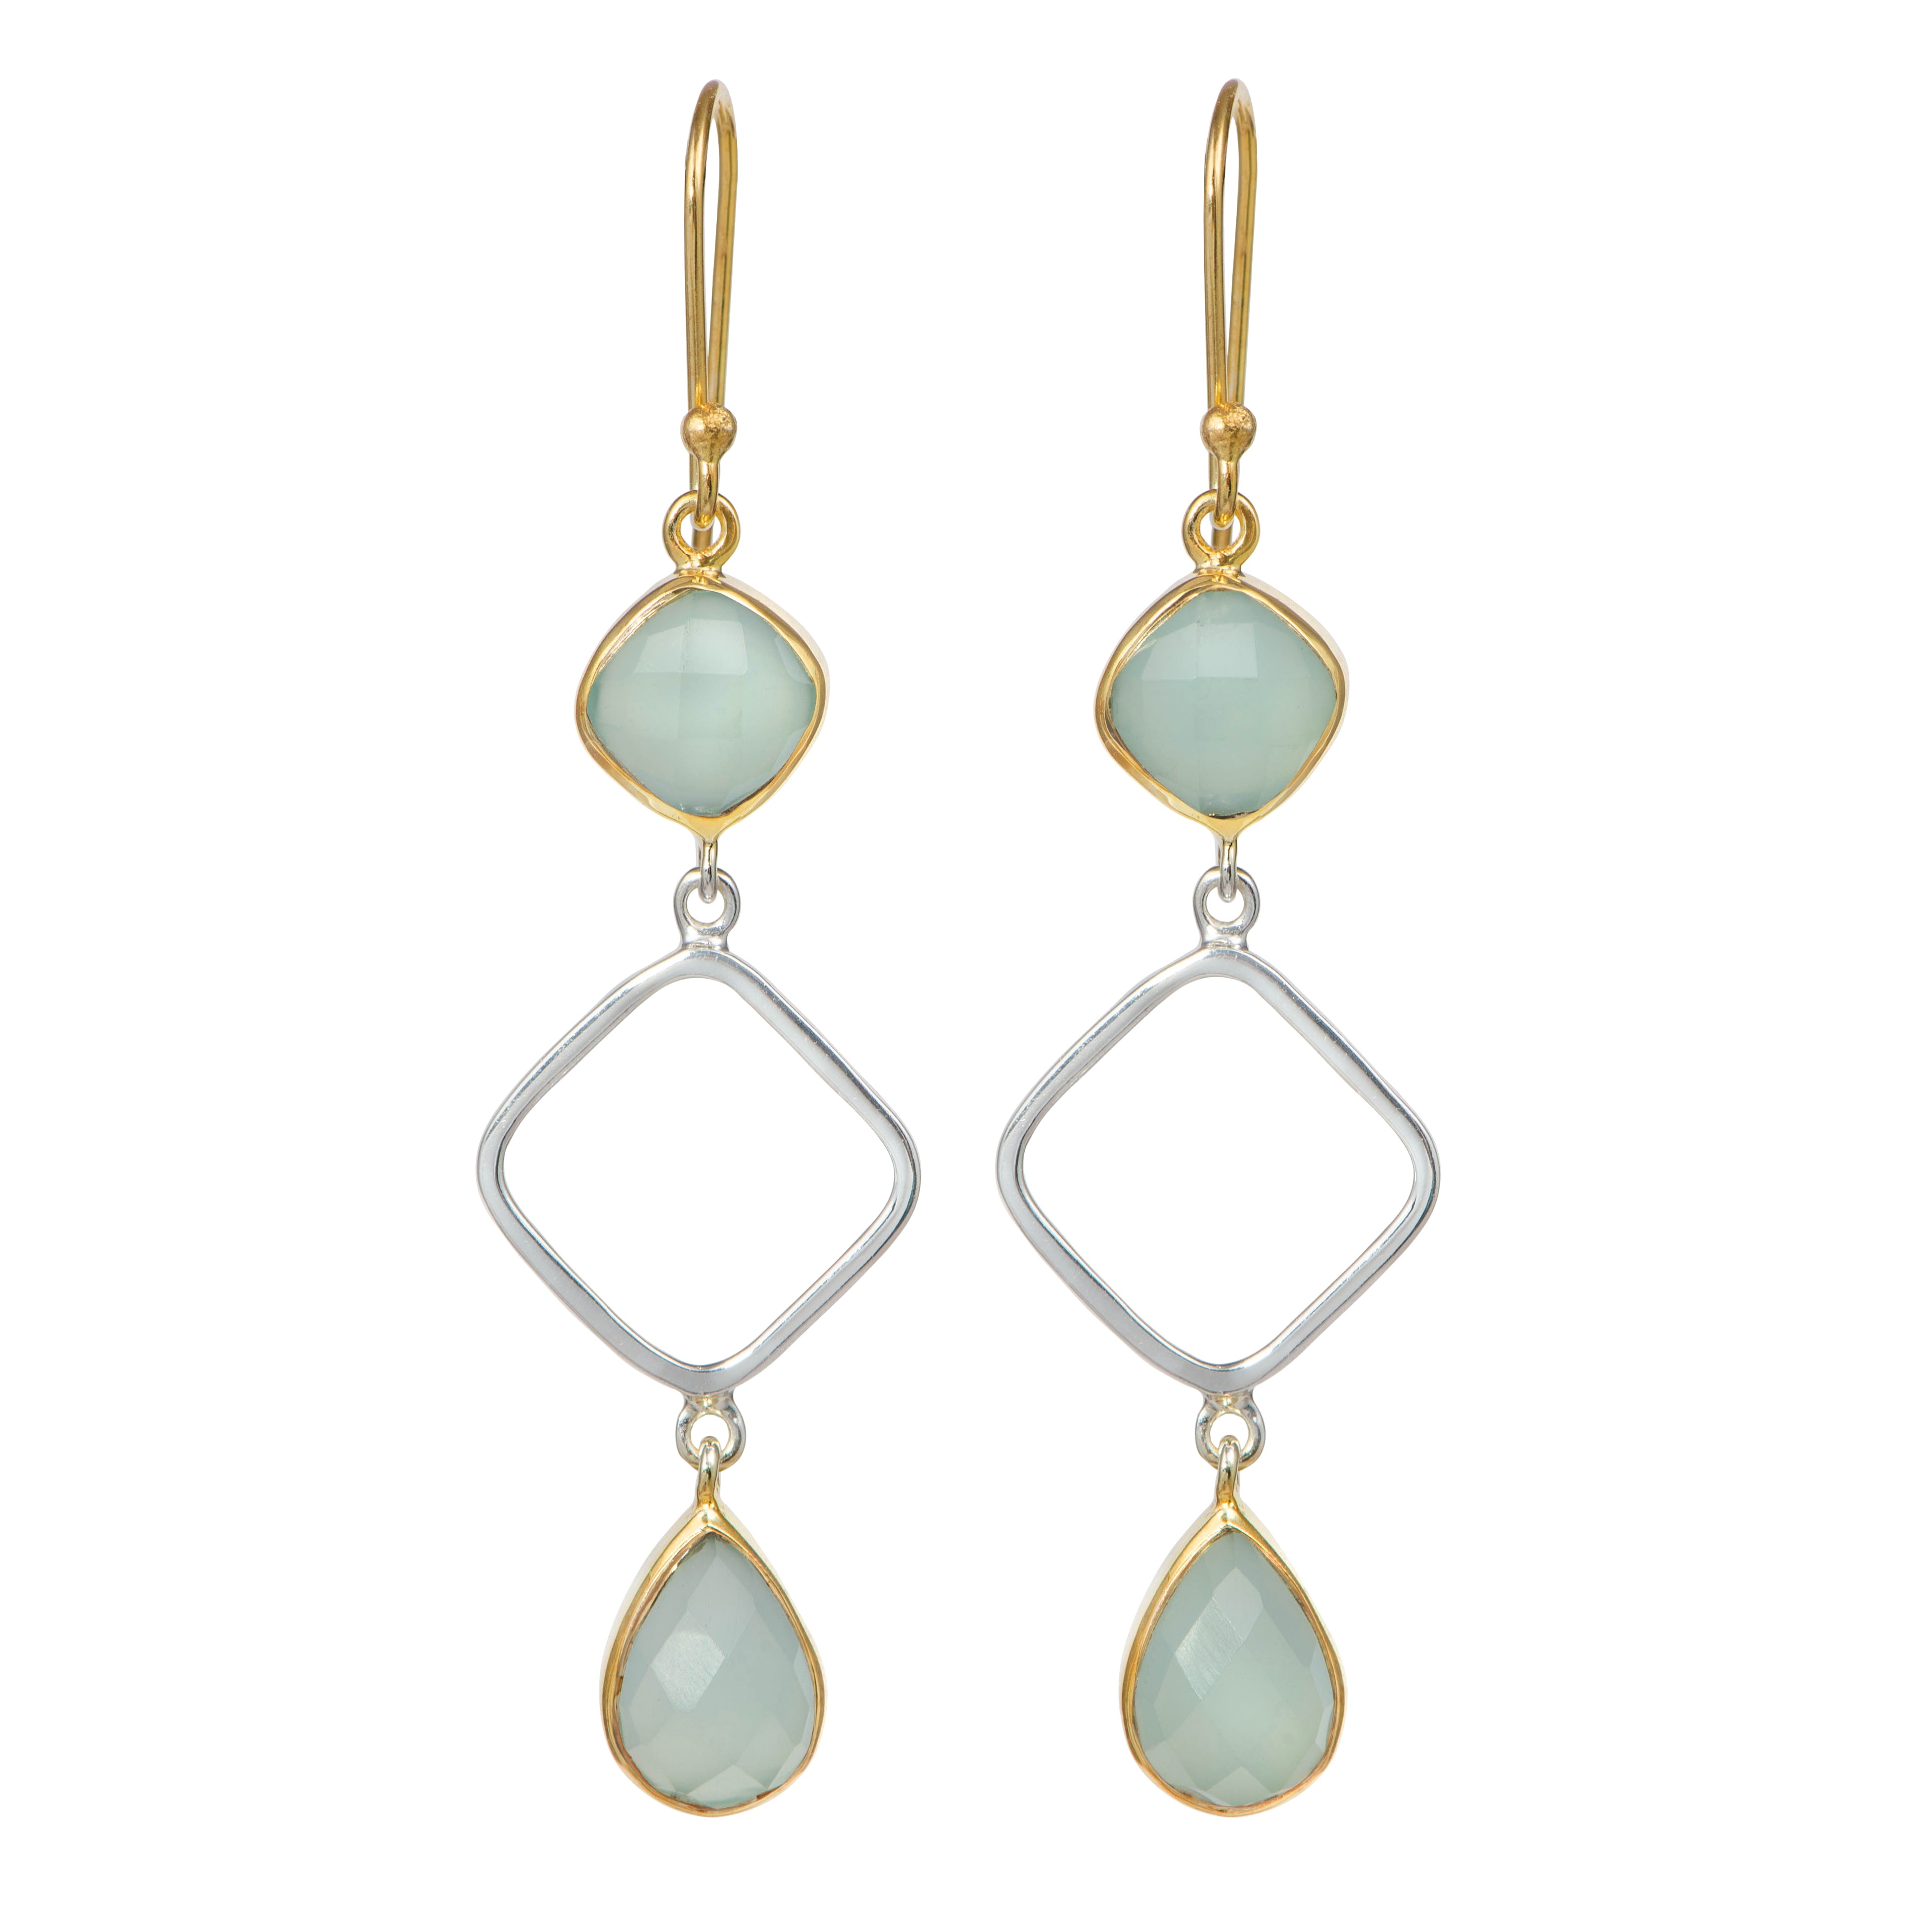 Aqua Chalcedony Two Tone Long Earrings with Two Faceted Gemstones